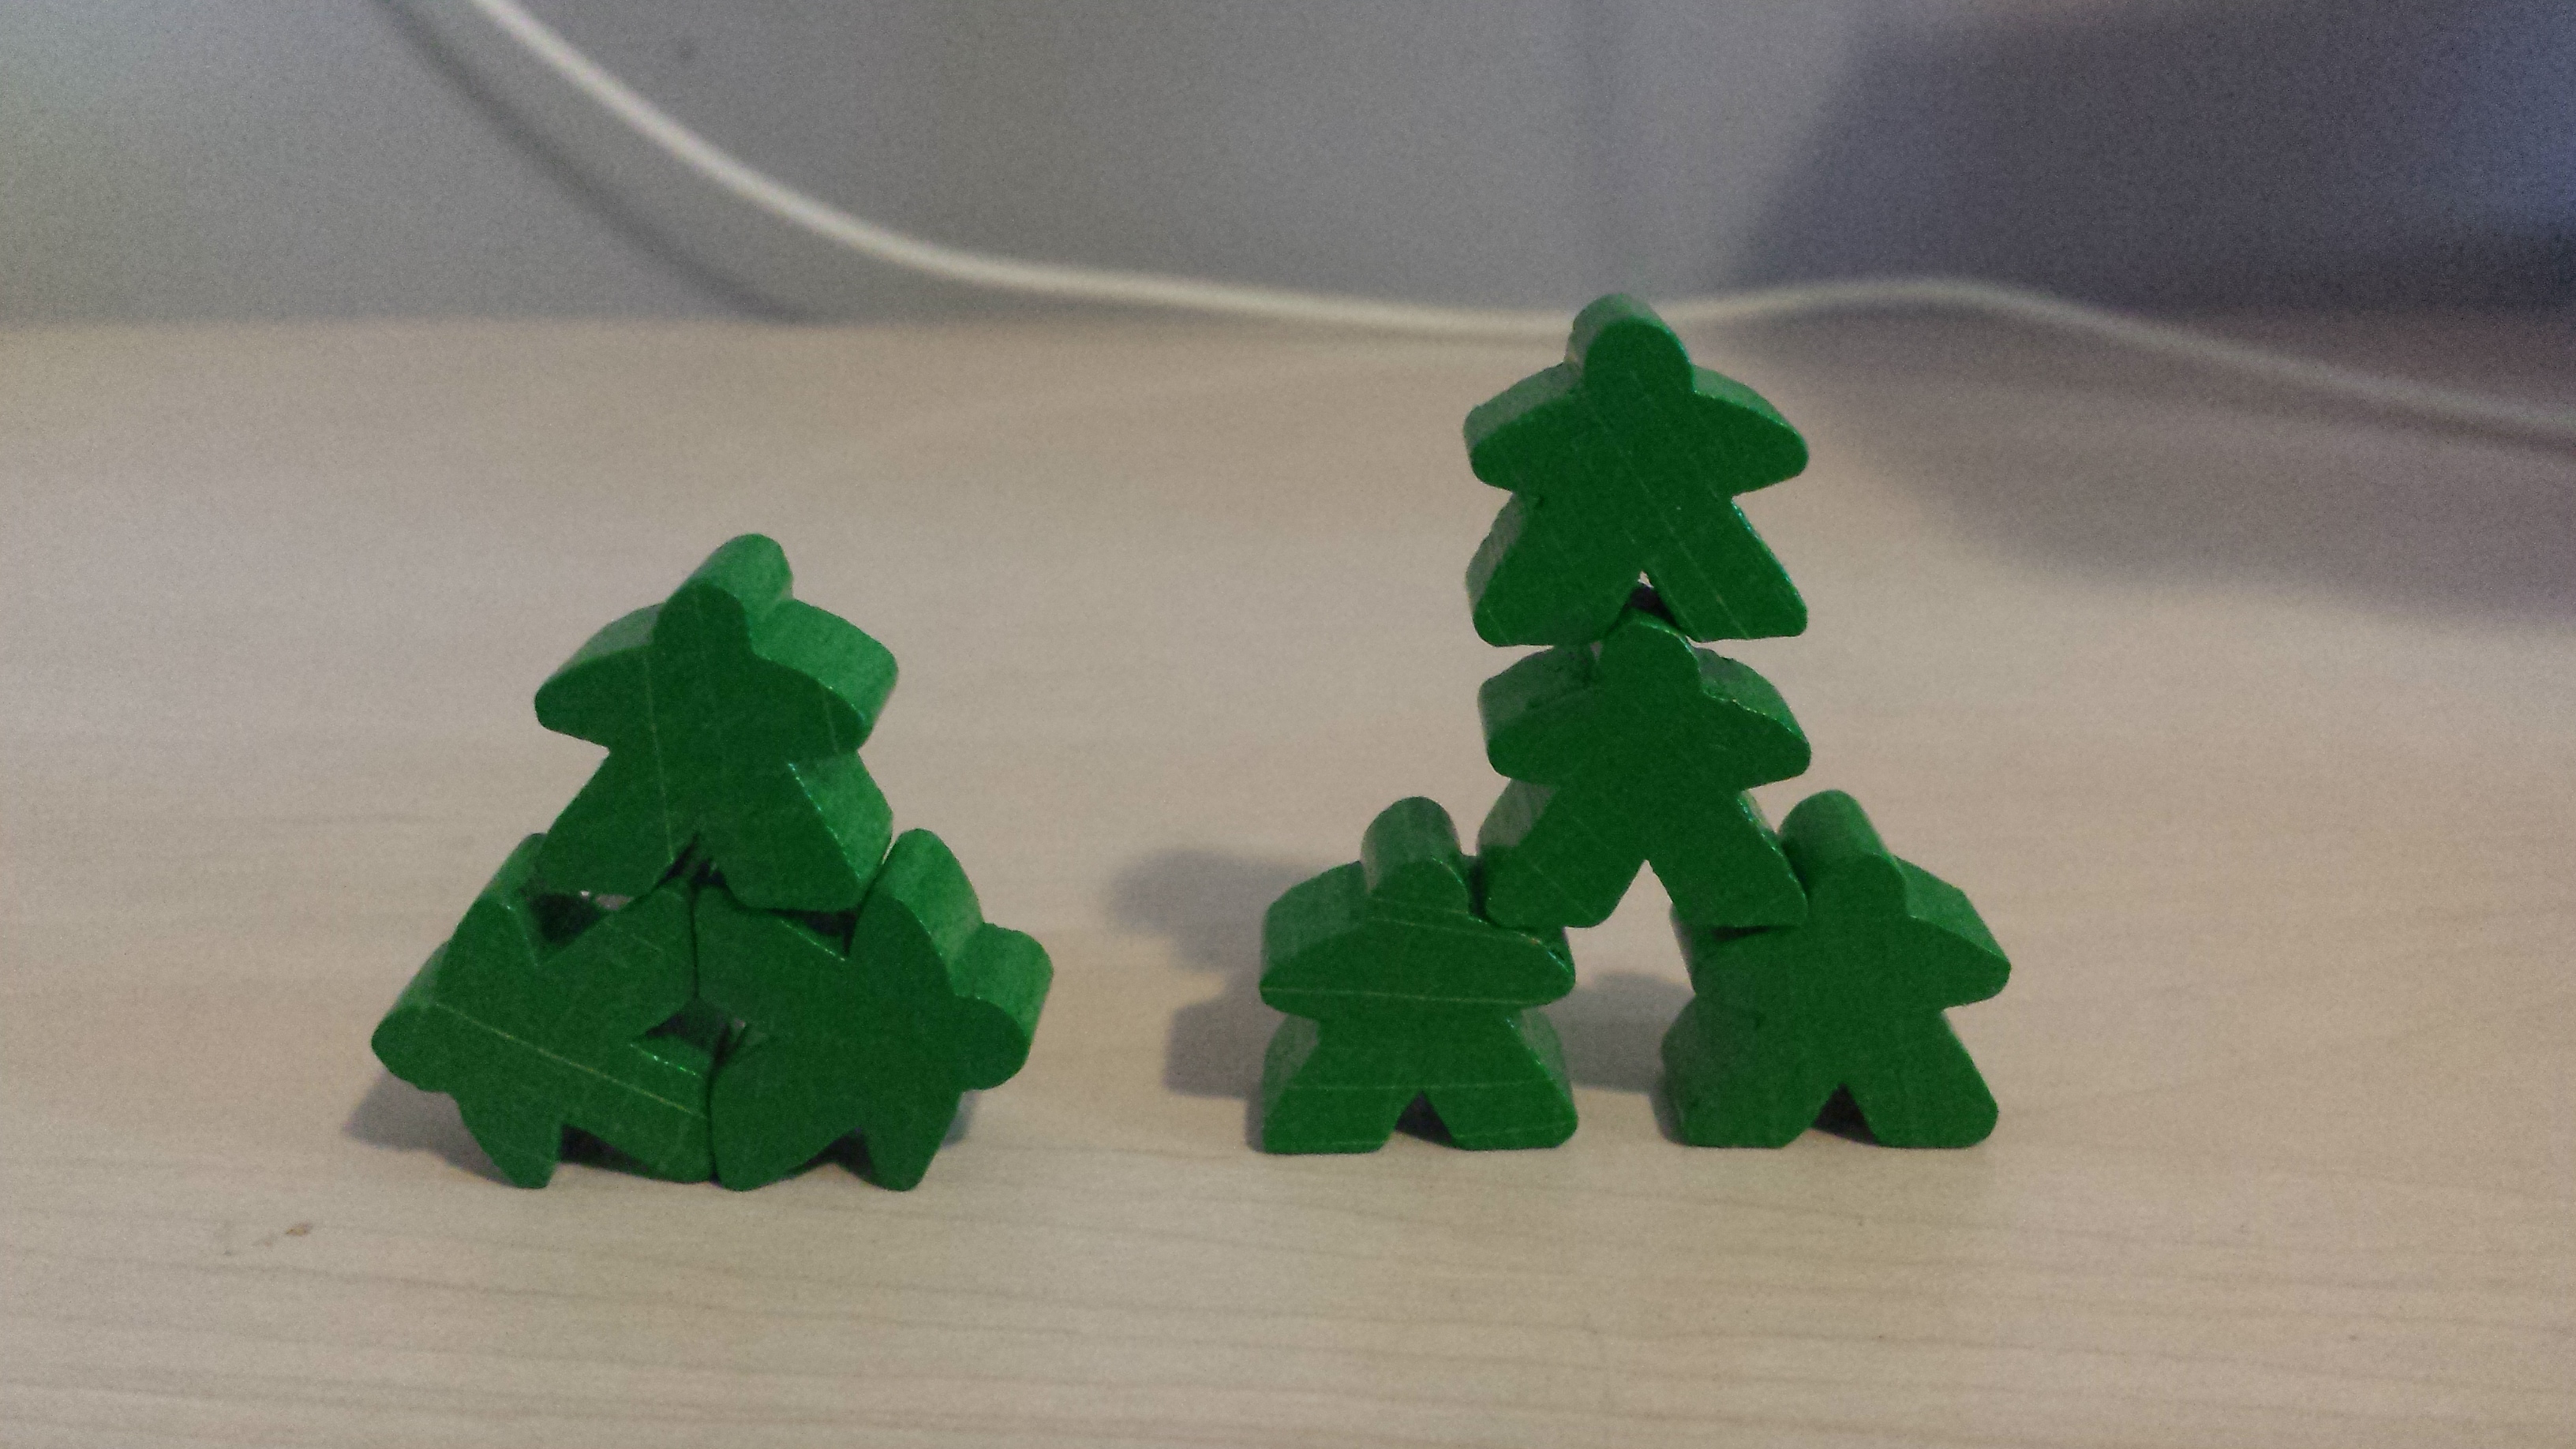 Carcassonne Meeple Stacking